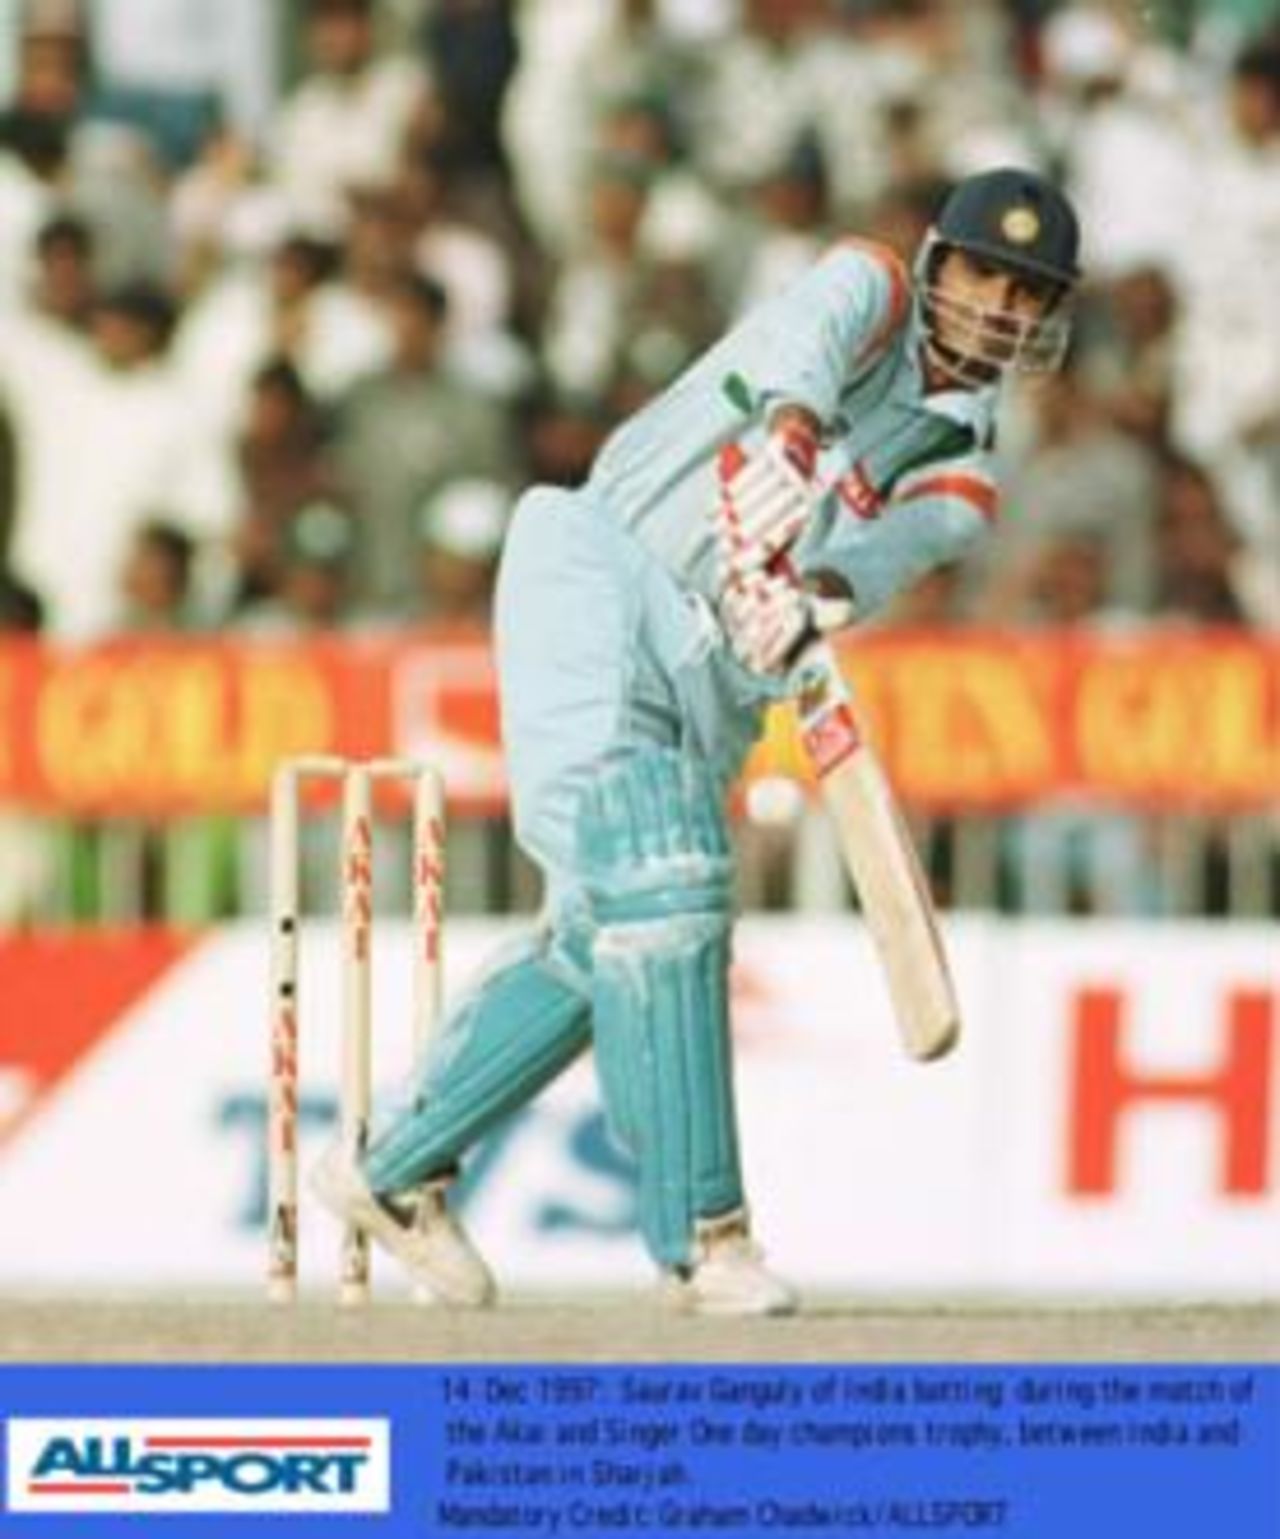 Saurav Ganguly is all determination, during the India Pakistan match, Dec 1997, Sharjah